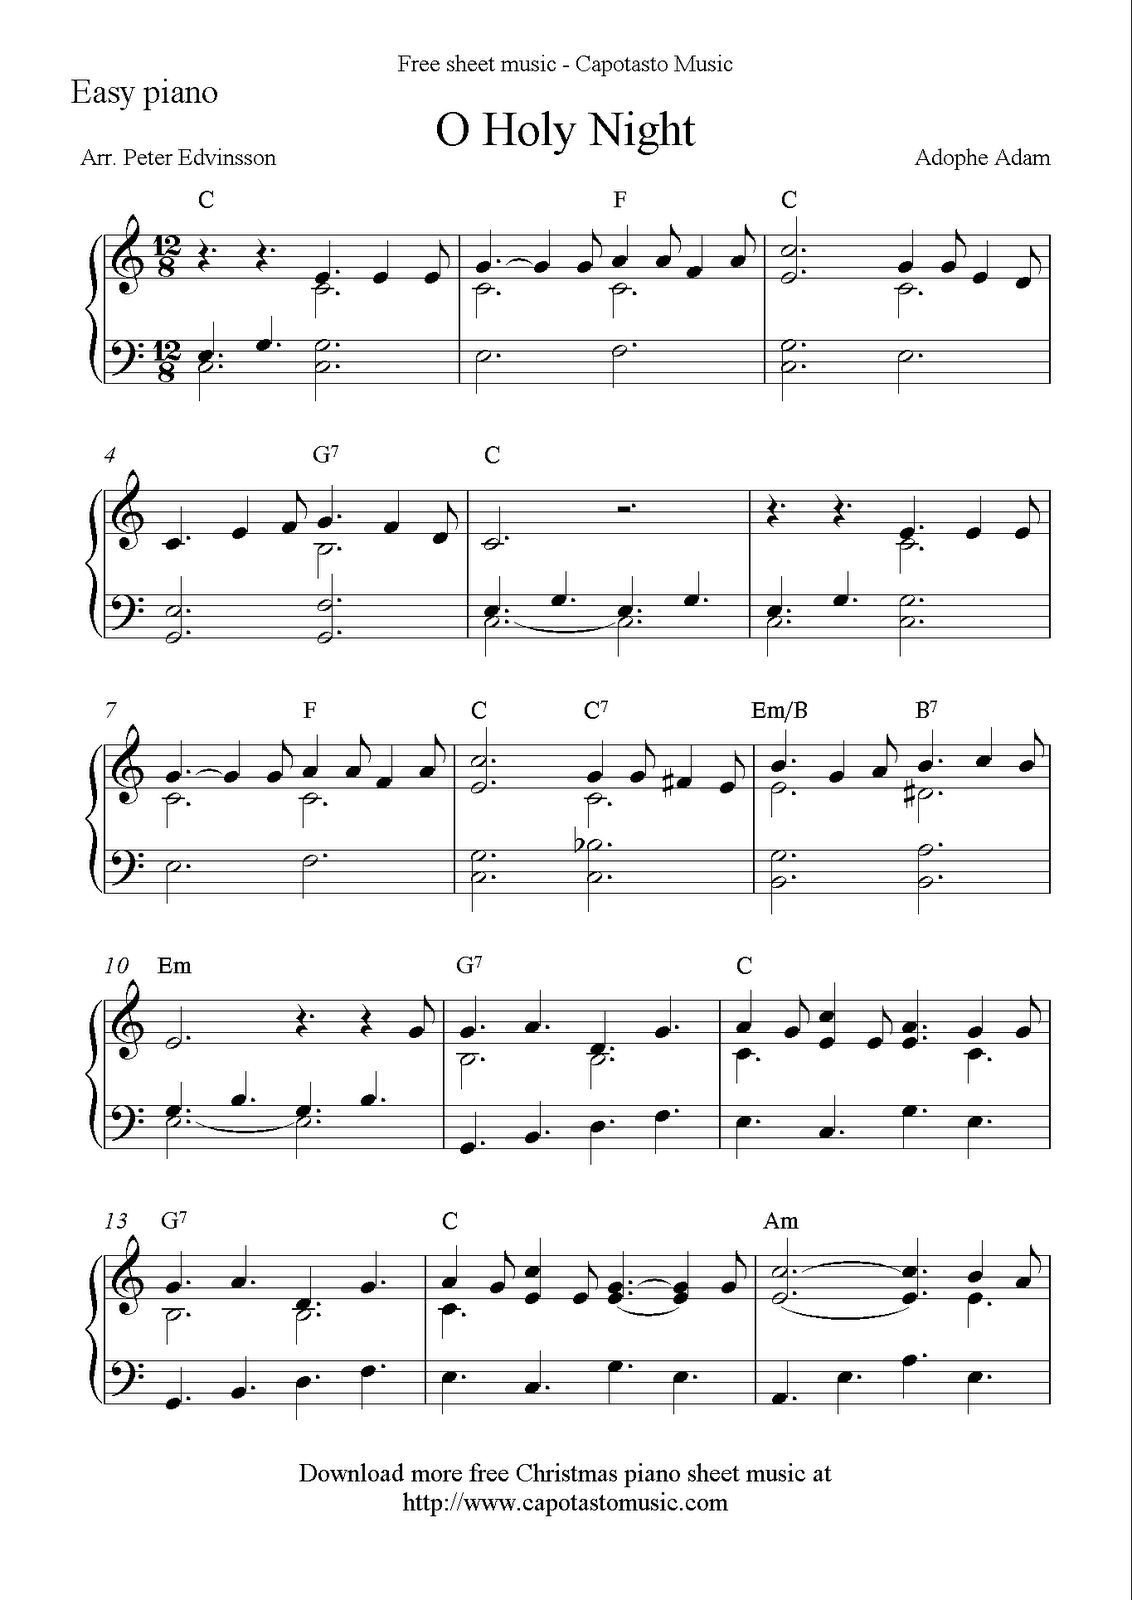 Free Sheet Music Scores: Free Easy Christmas Piano Sheet Music, O - Free Christmas Piano Sheet Music For Beginners Printable